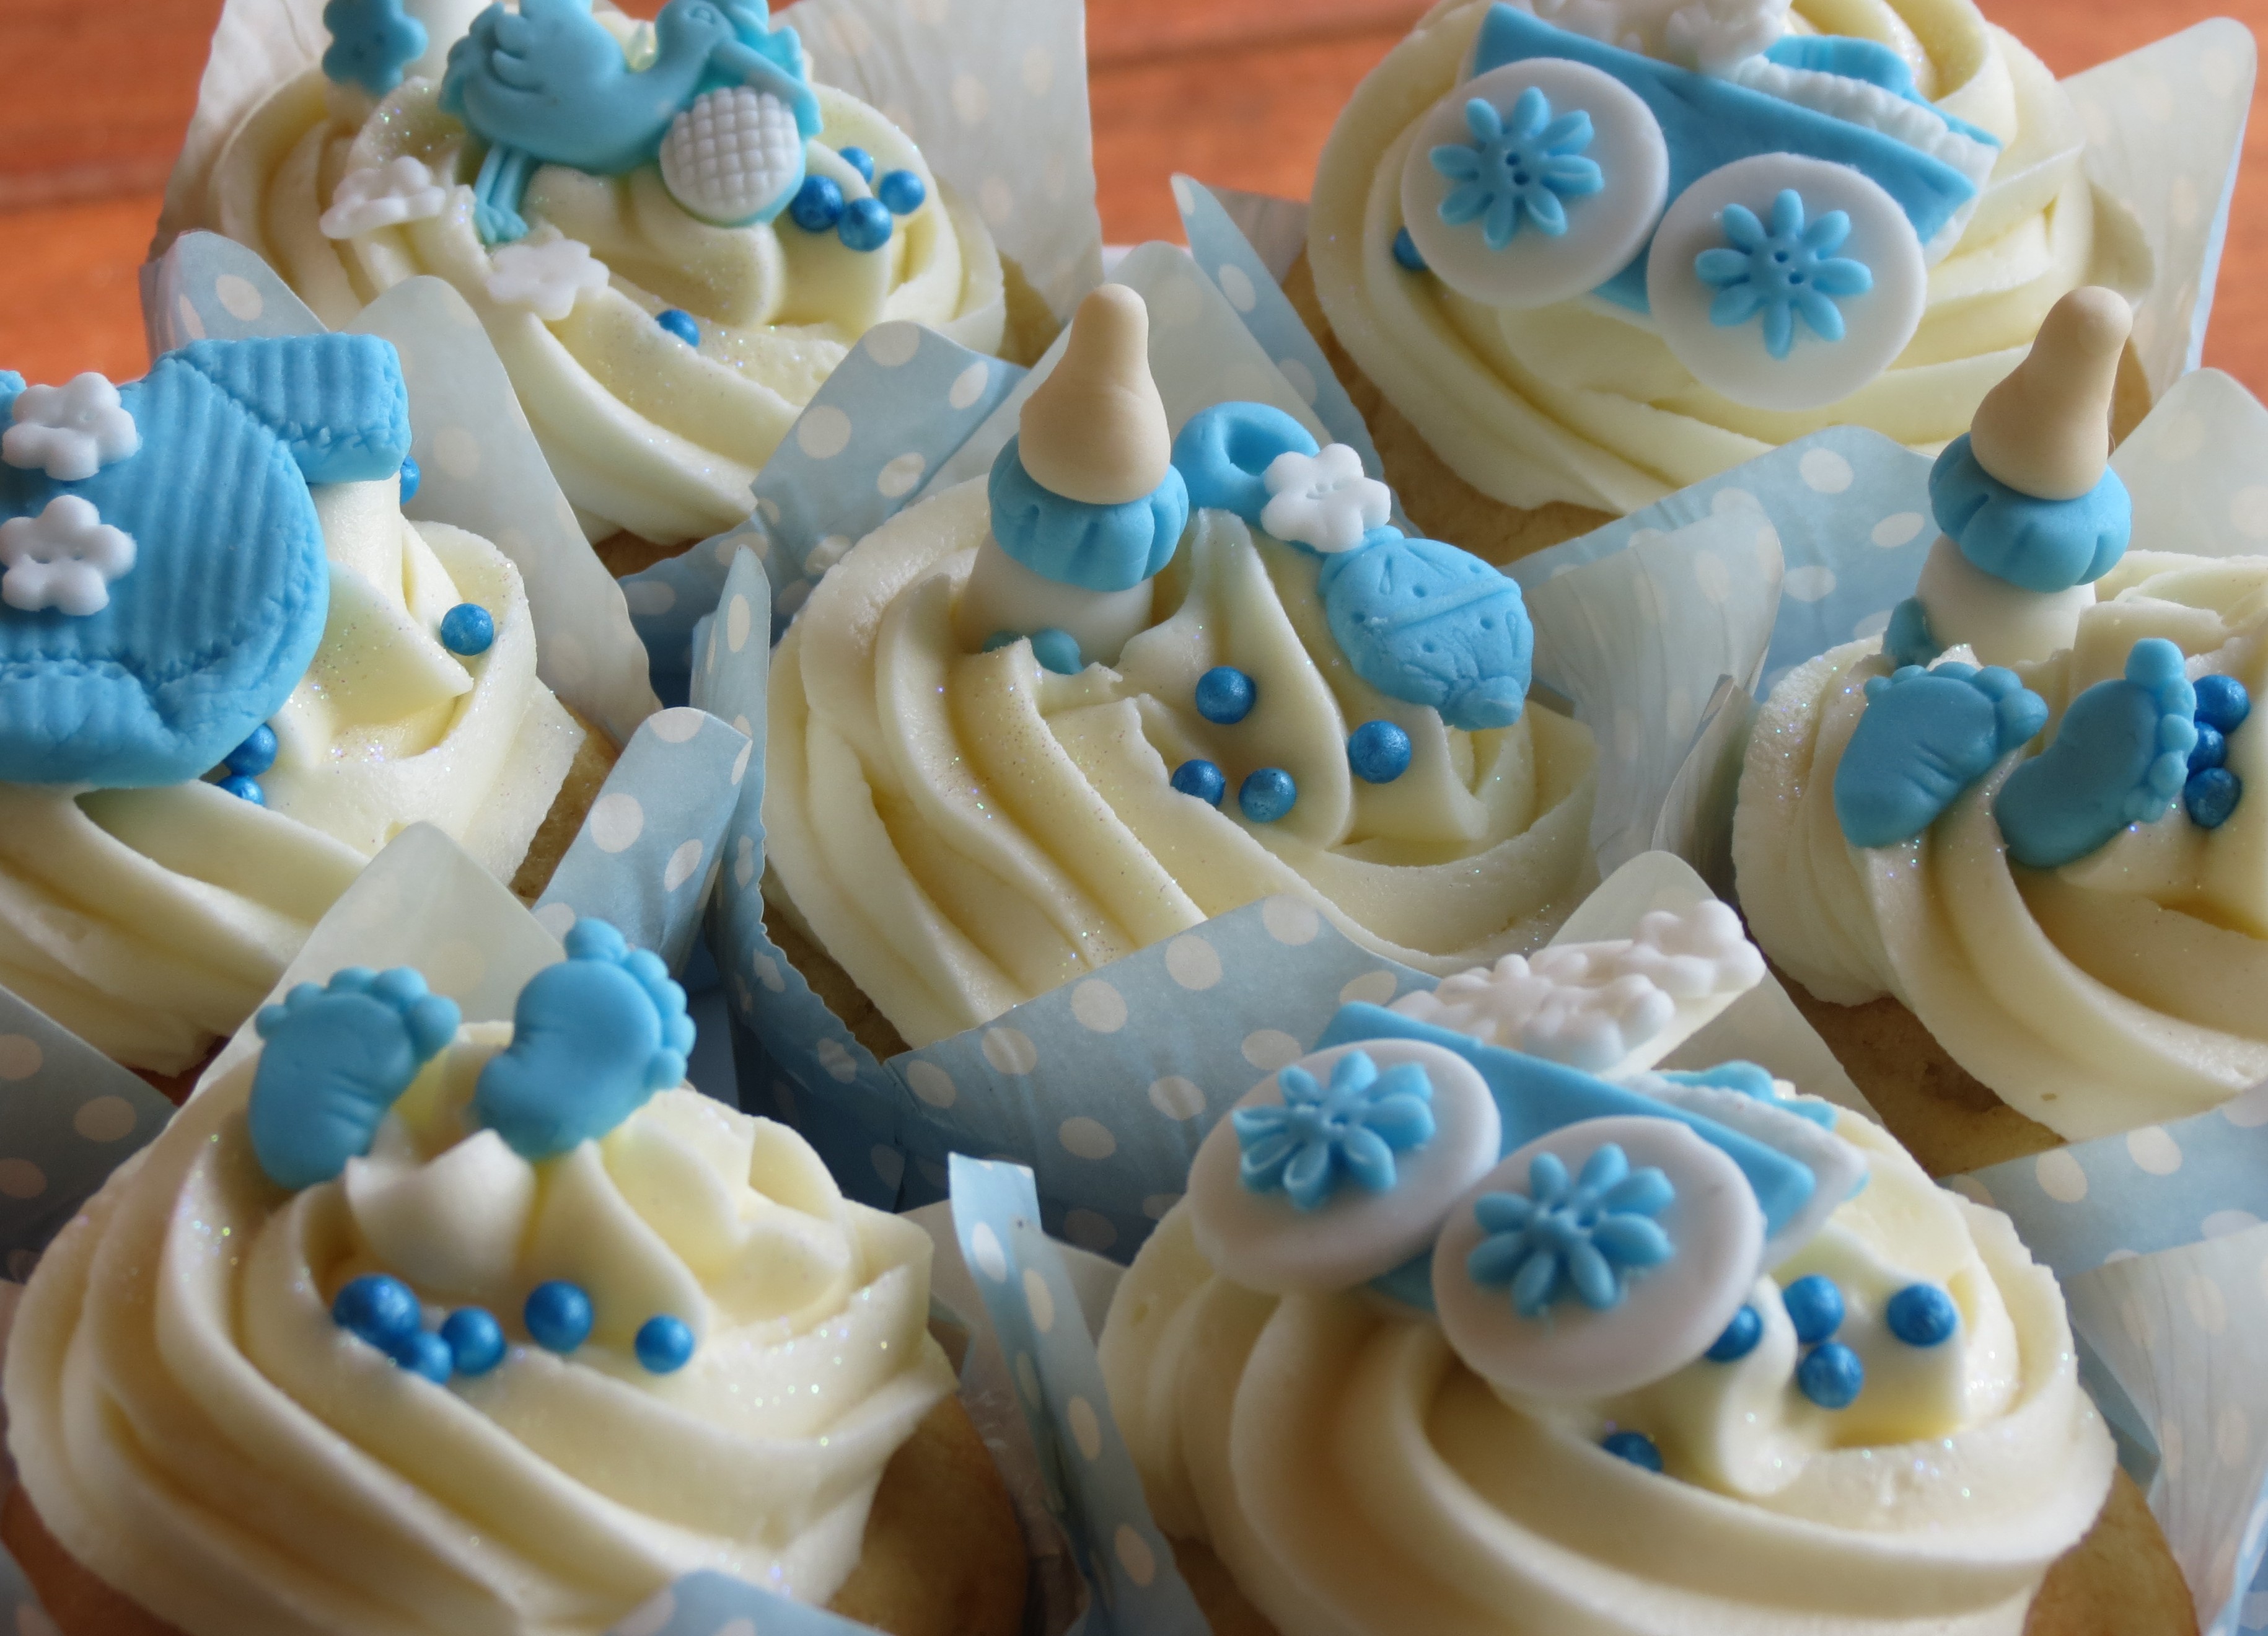 Baby shower cupcakes for a baby boy. Baby Boy cupcakes